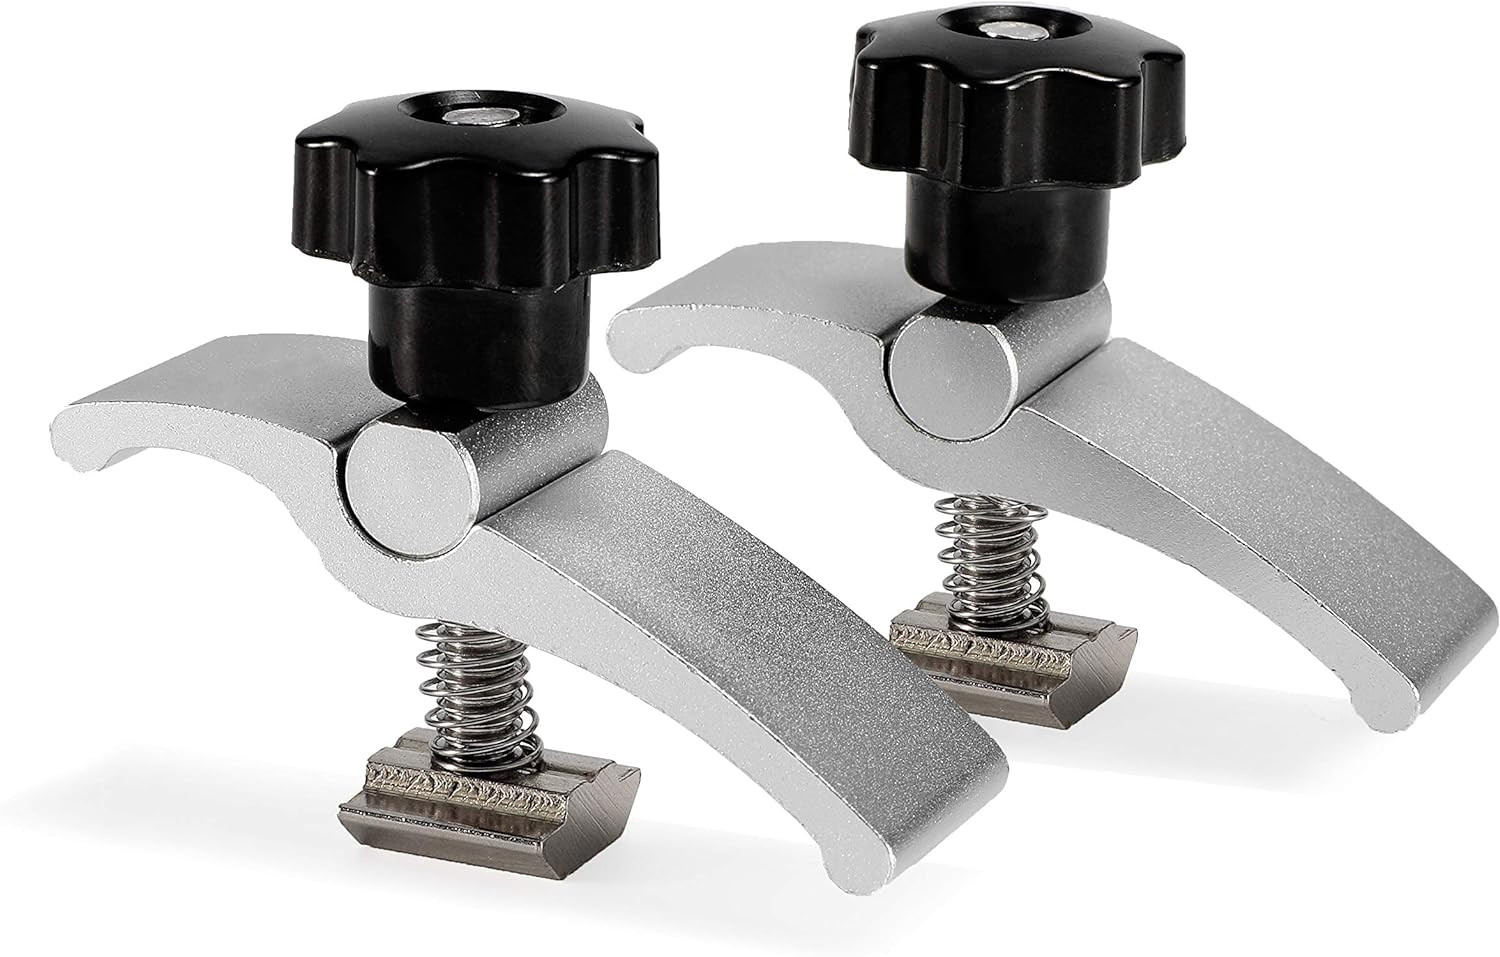 See more about Clamps & Fasteners